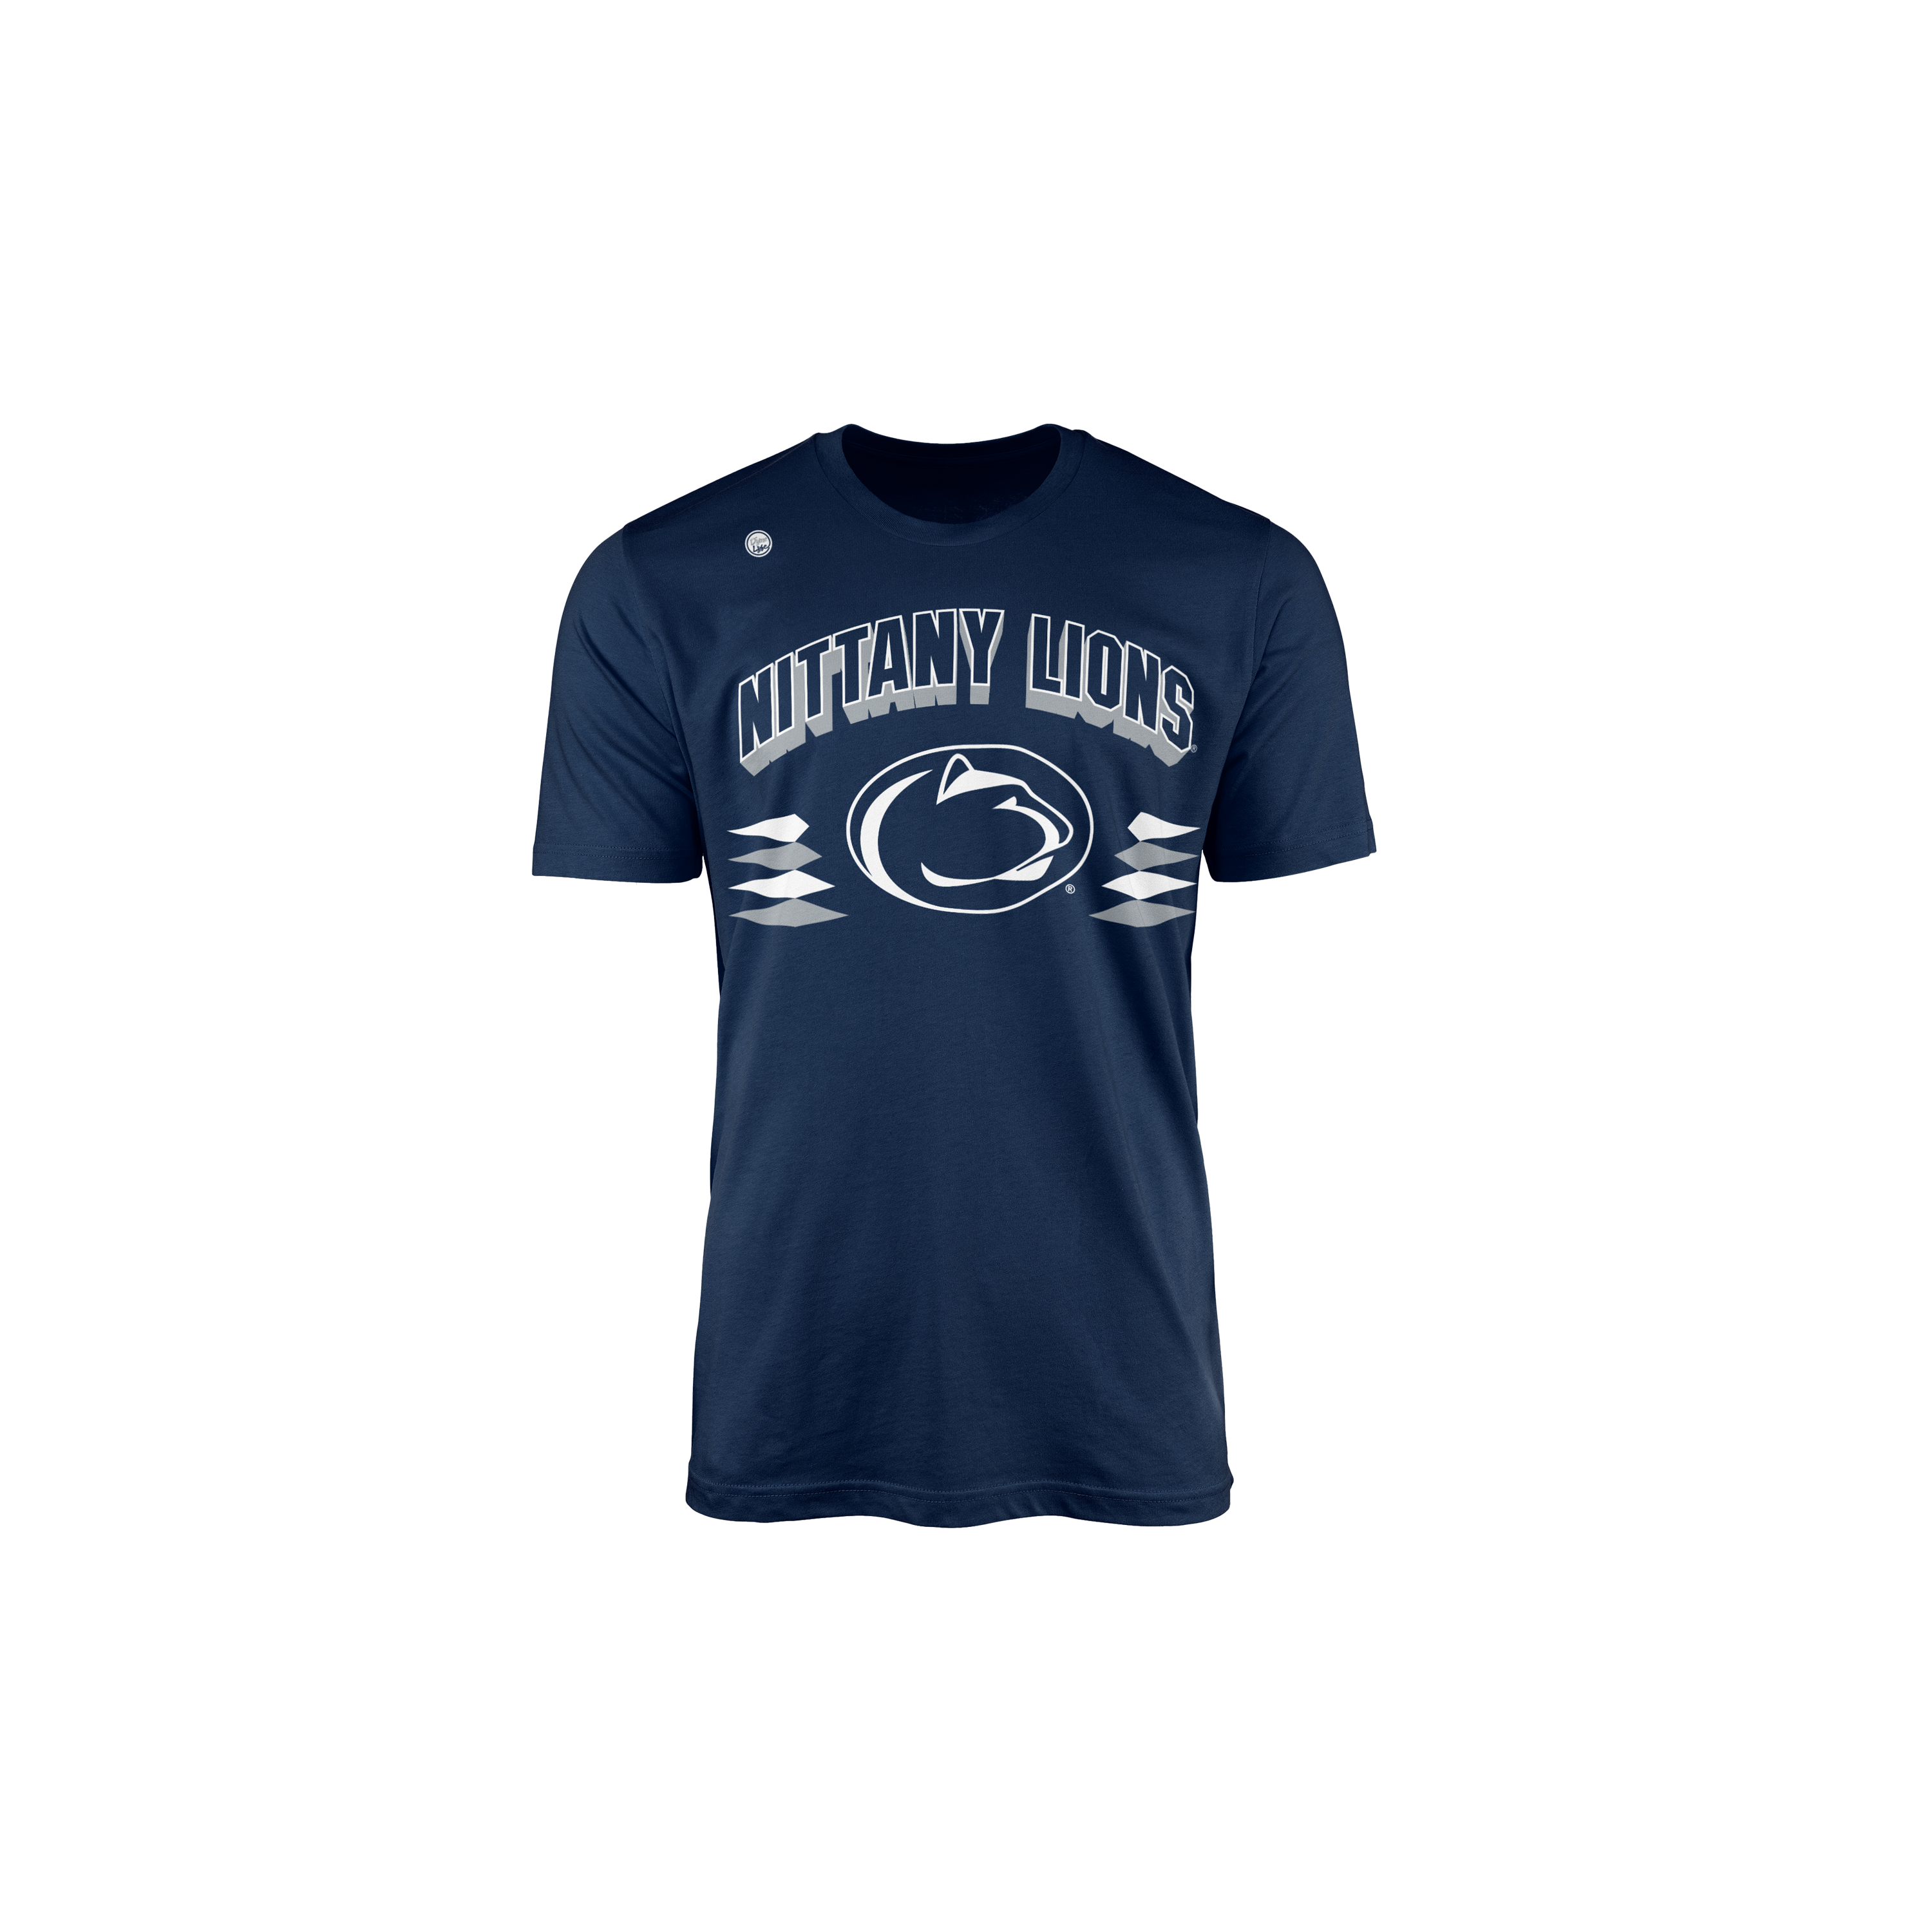 Penn State Nittany Lions Youth Retro Tee